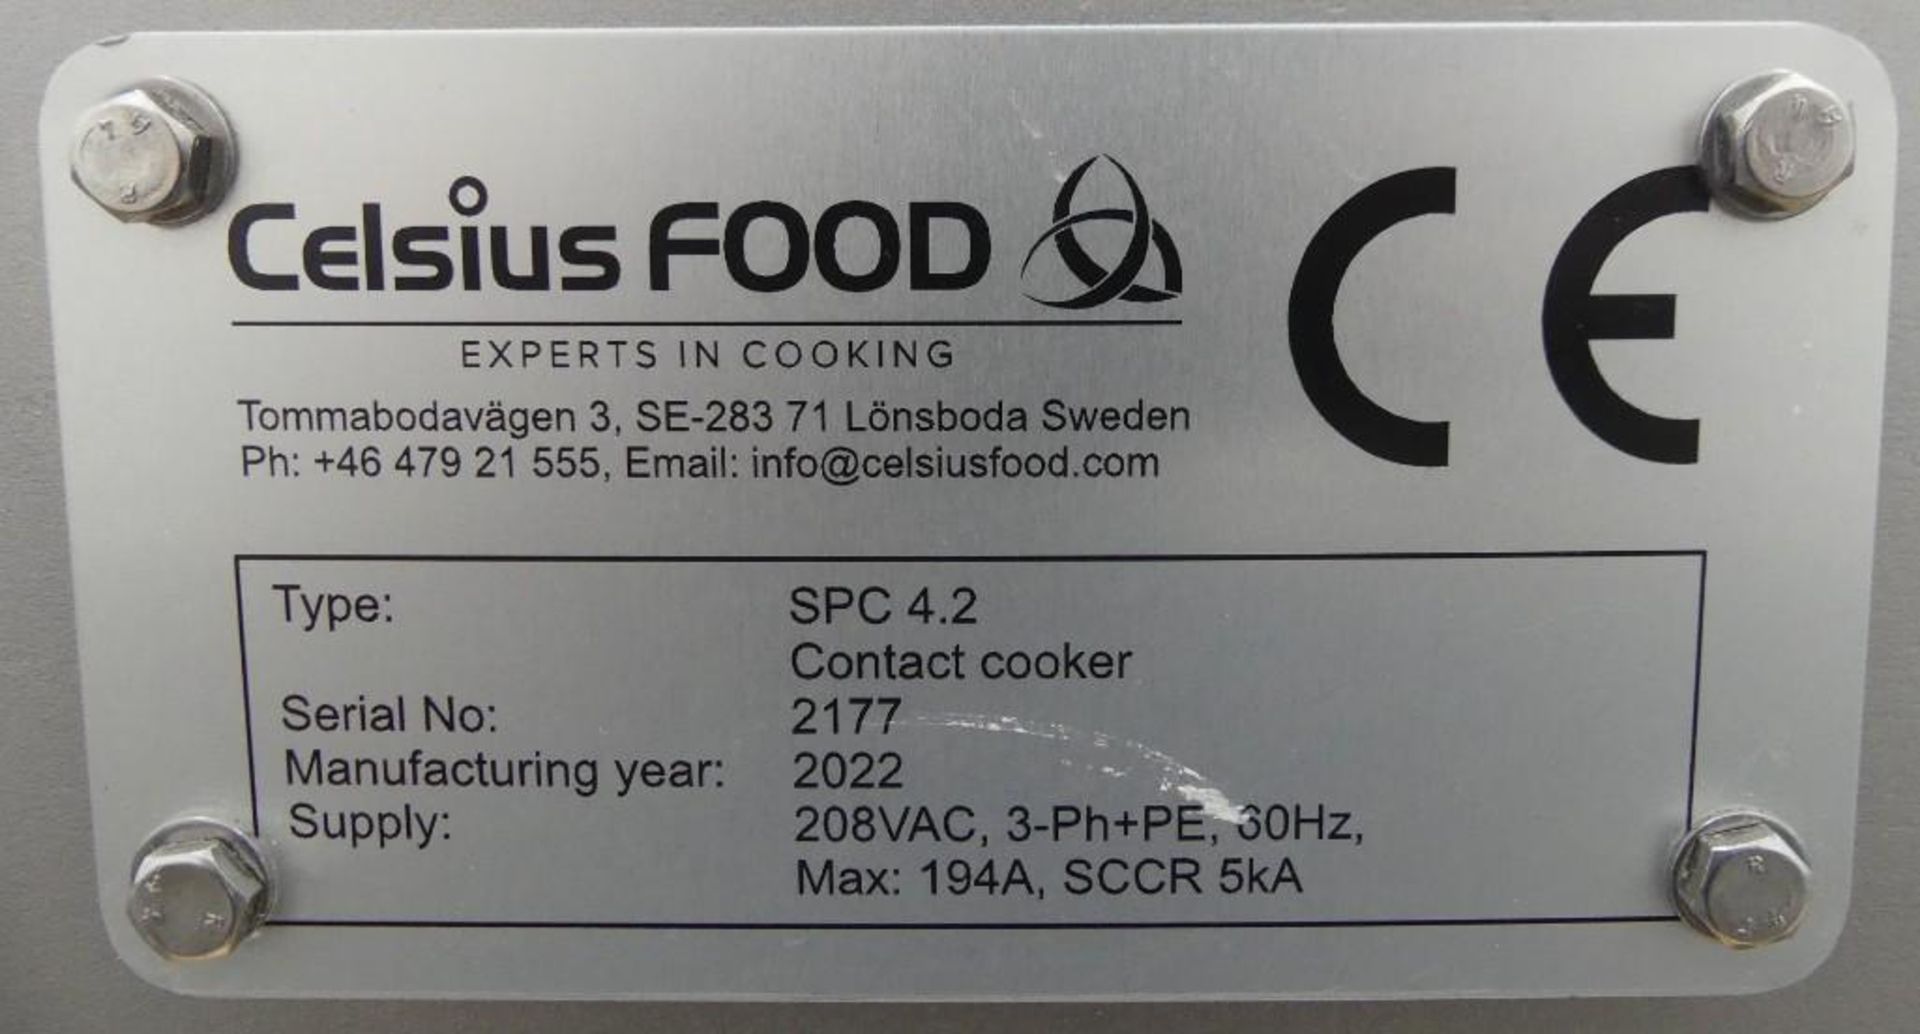 Celsius SPC 4.2 Stainless Steel Contact Cooker - Image 17 of 39